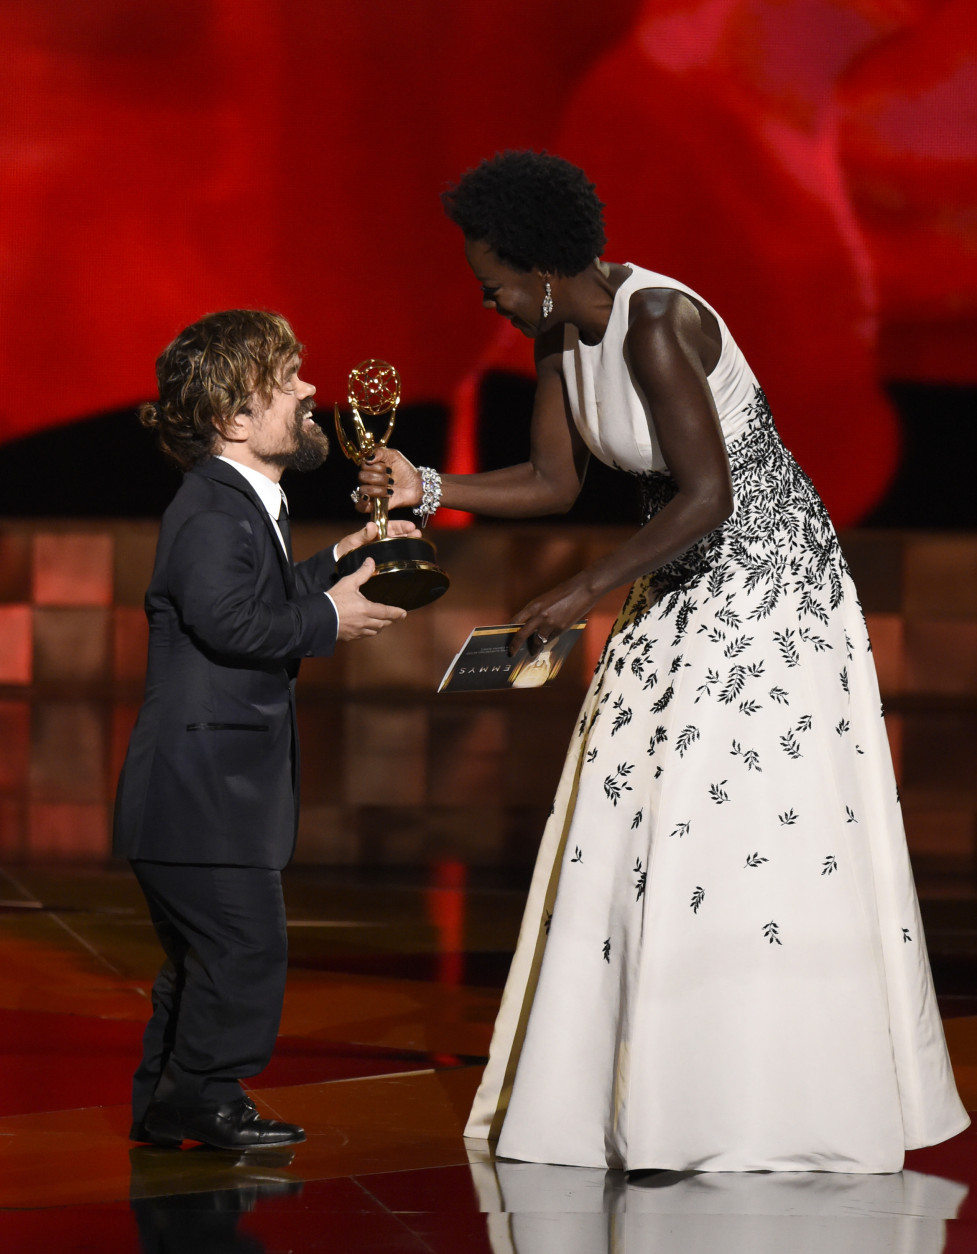 Viola Davis, right, presents Peter Dinklage with the award for outstanding supporting actor in a drama series for Game of Thrones at the 67th Primetime Emmy Awards on Sunday, Sept. 20, 2015, at the Microsoft Theater in Los Angeles. (Photo by Chris Pizzello/Invision/AP)